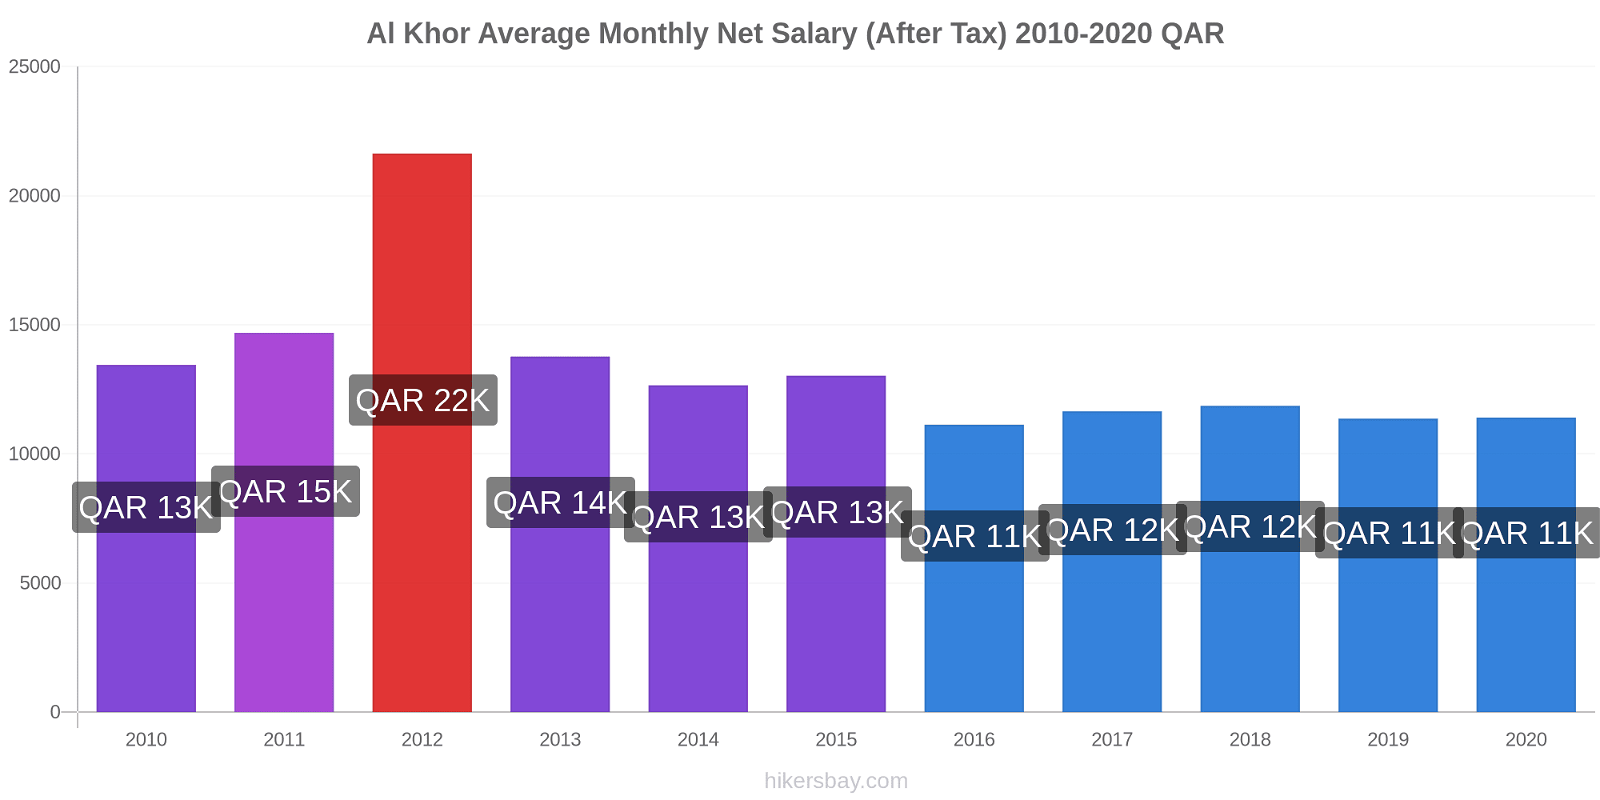 Al Khor price changes Average Monthly Net Salary (After Tax) hikersbay.com